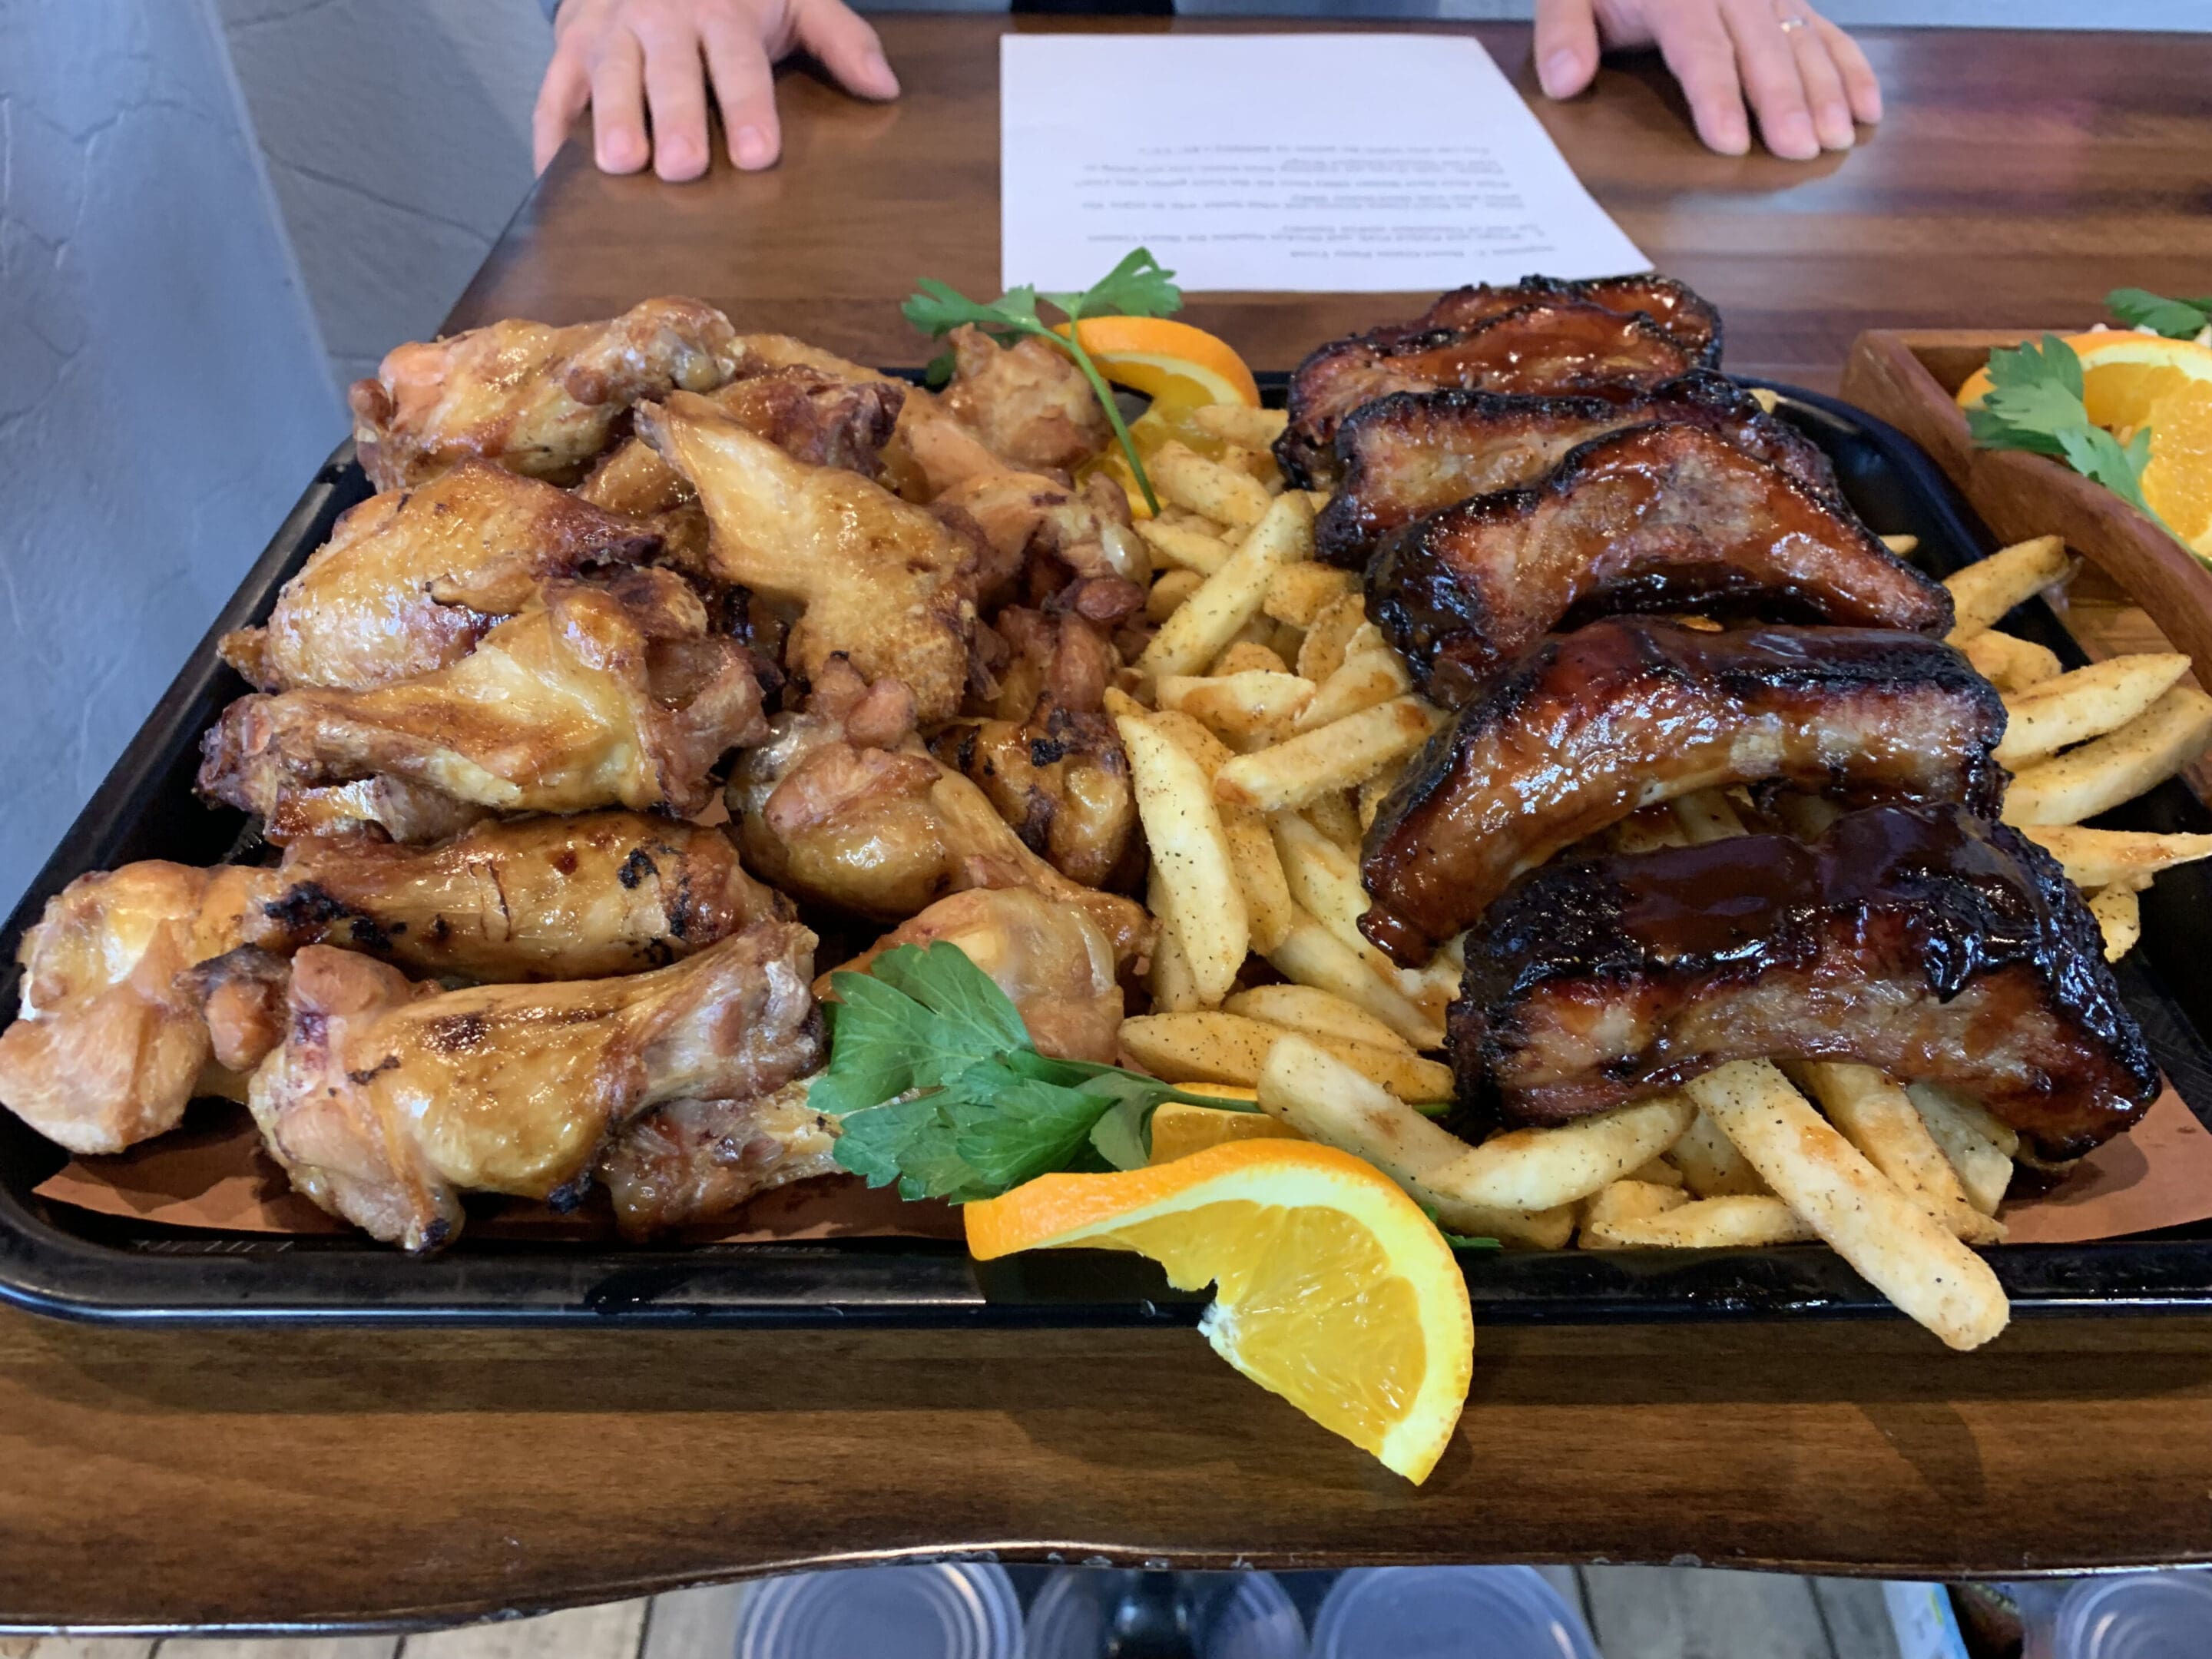 A tray of food with meat and french fries.